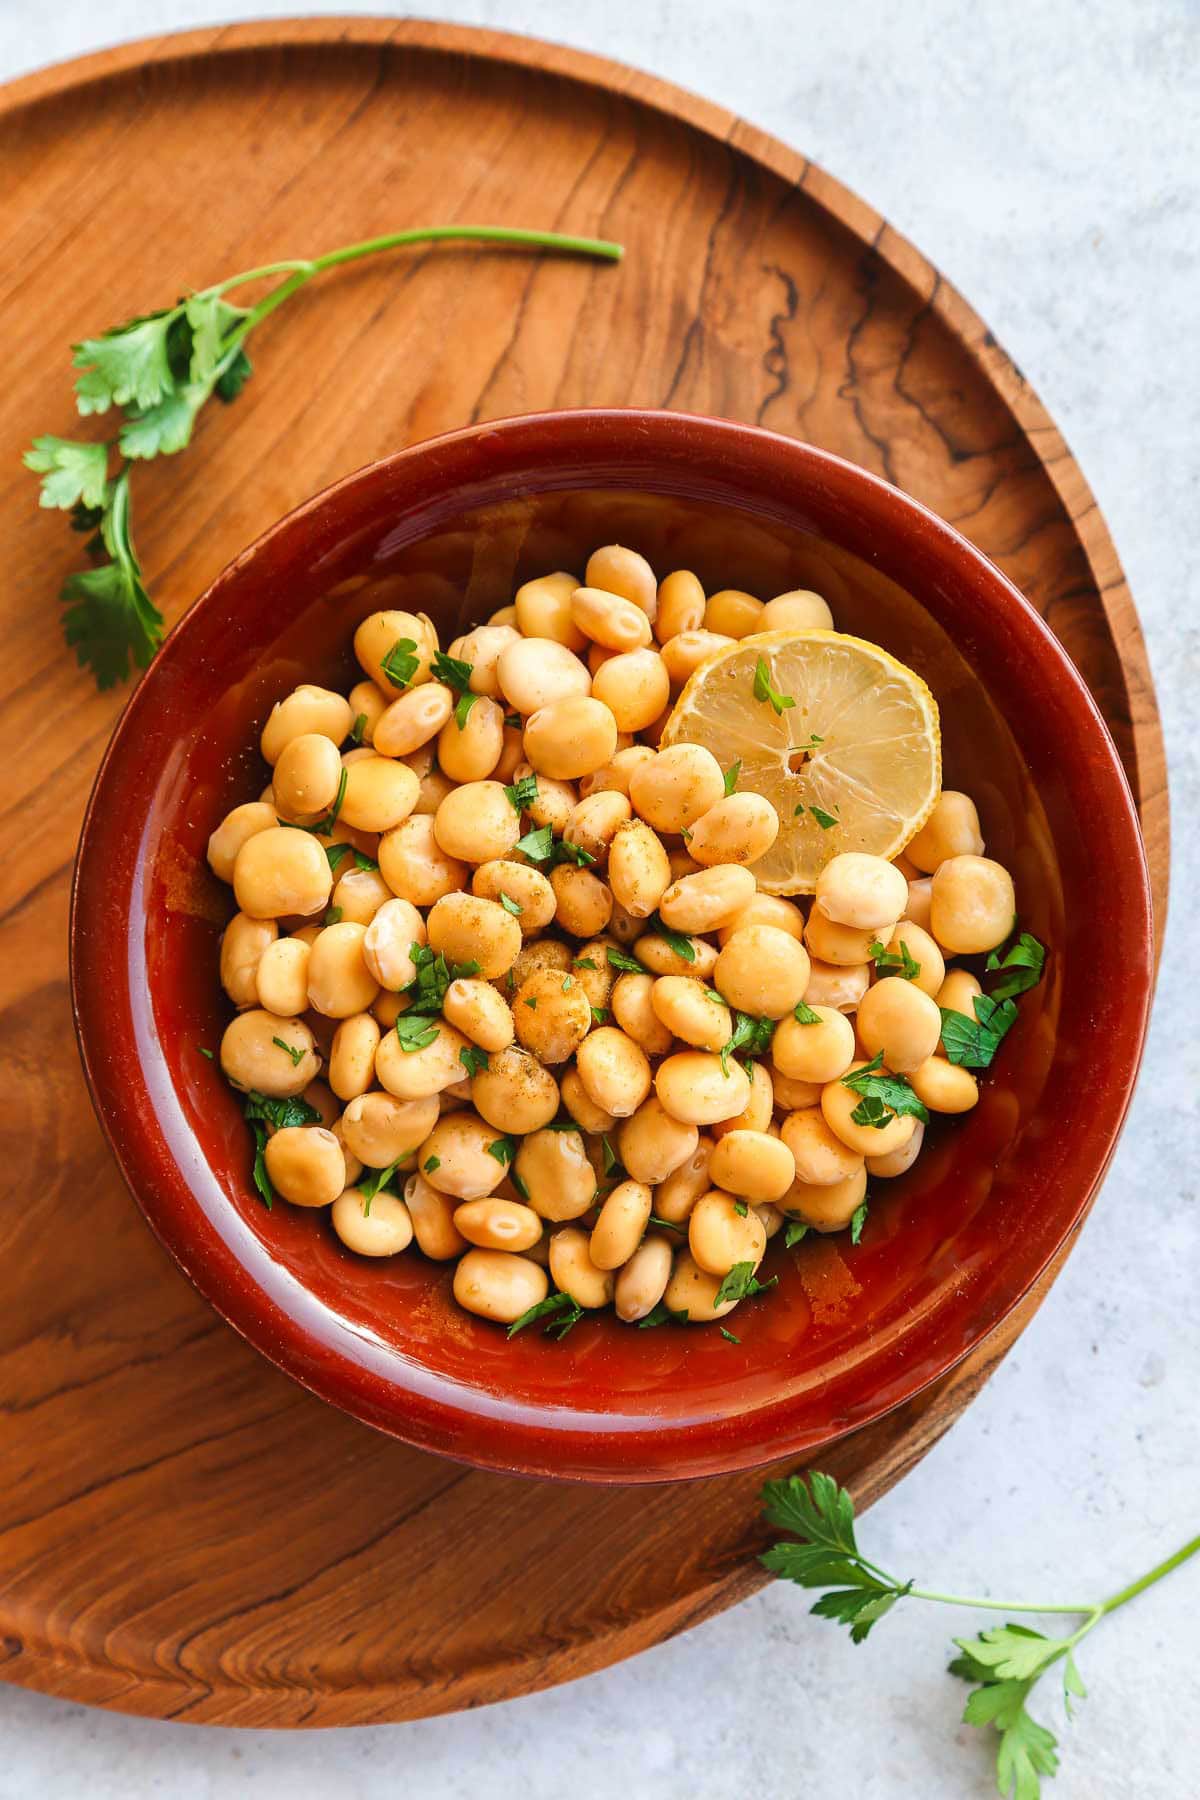 Cooked Lupini beans served with parsley in a traditional middle eastern bowl